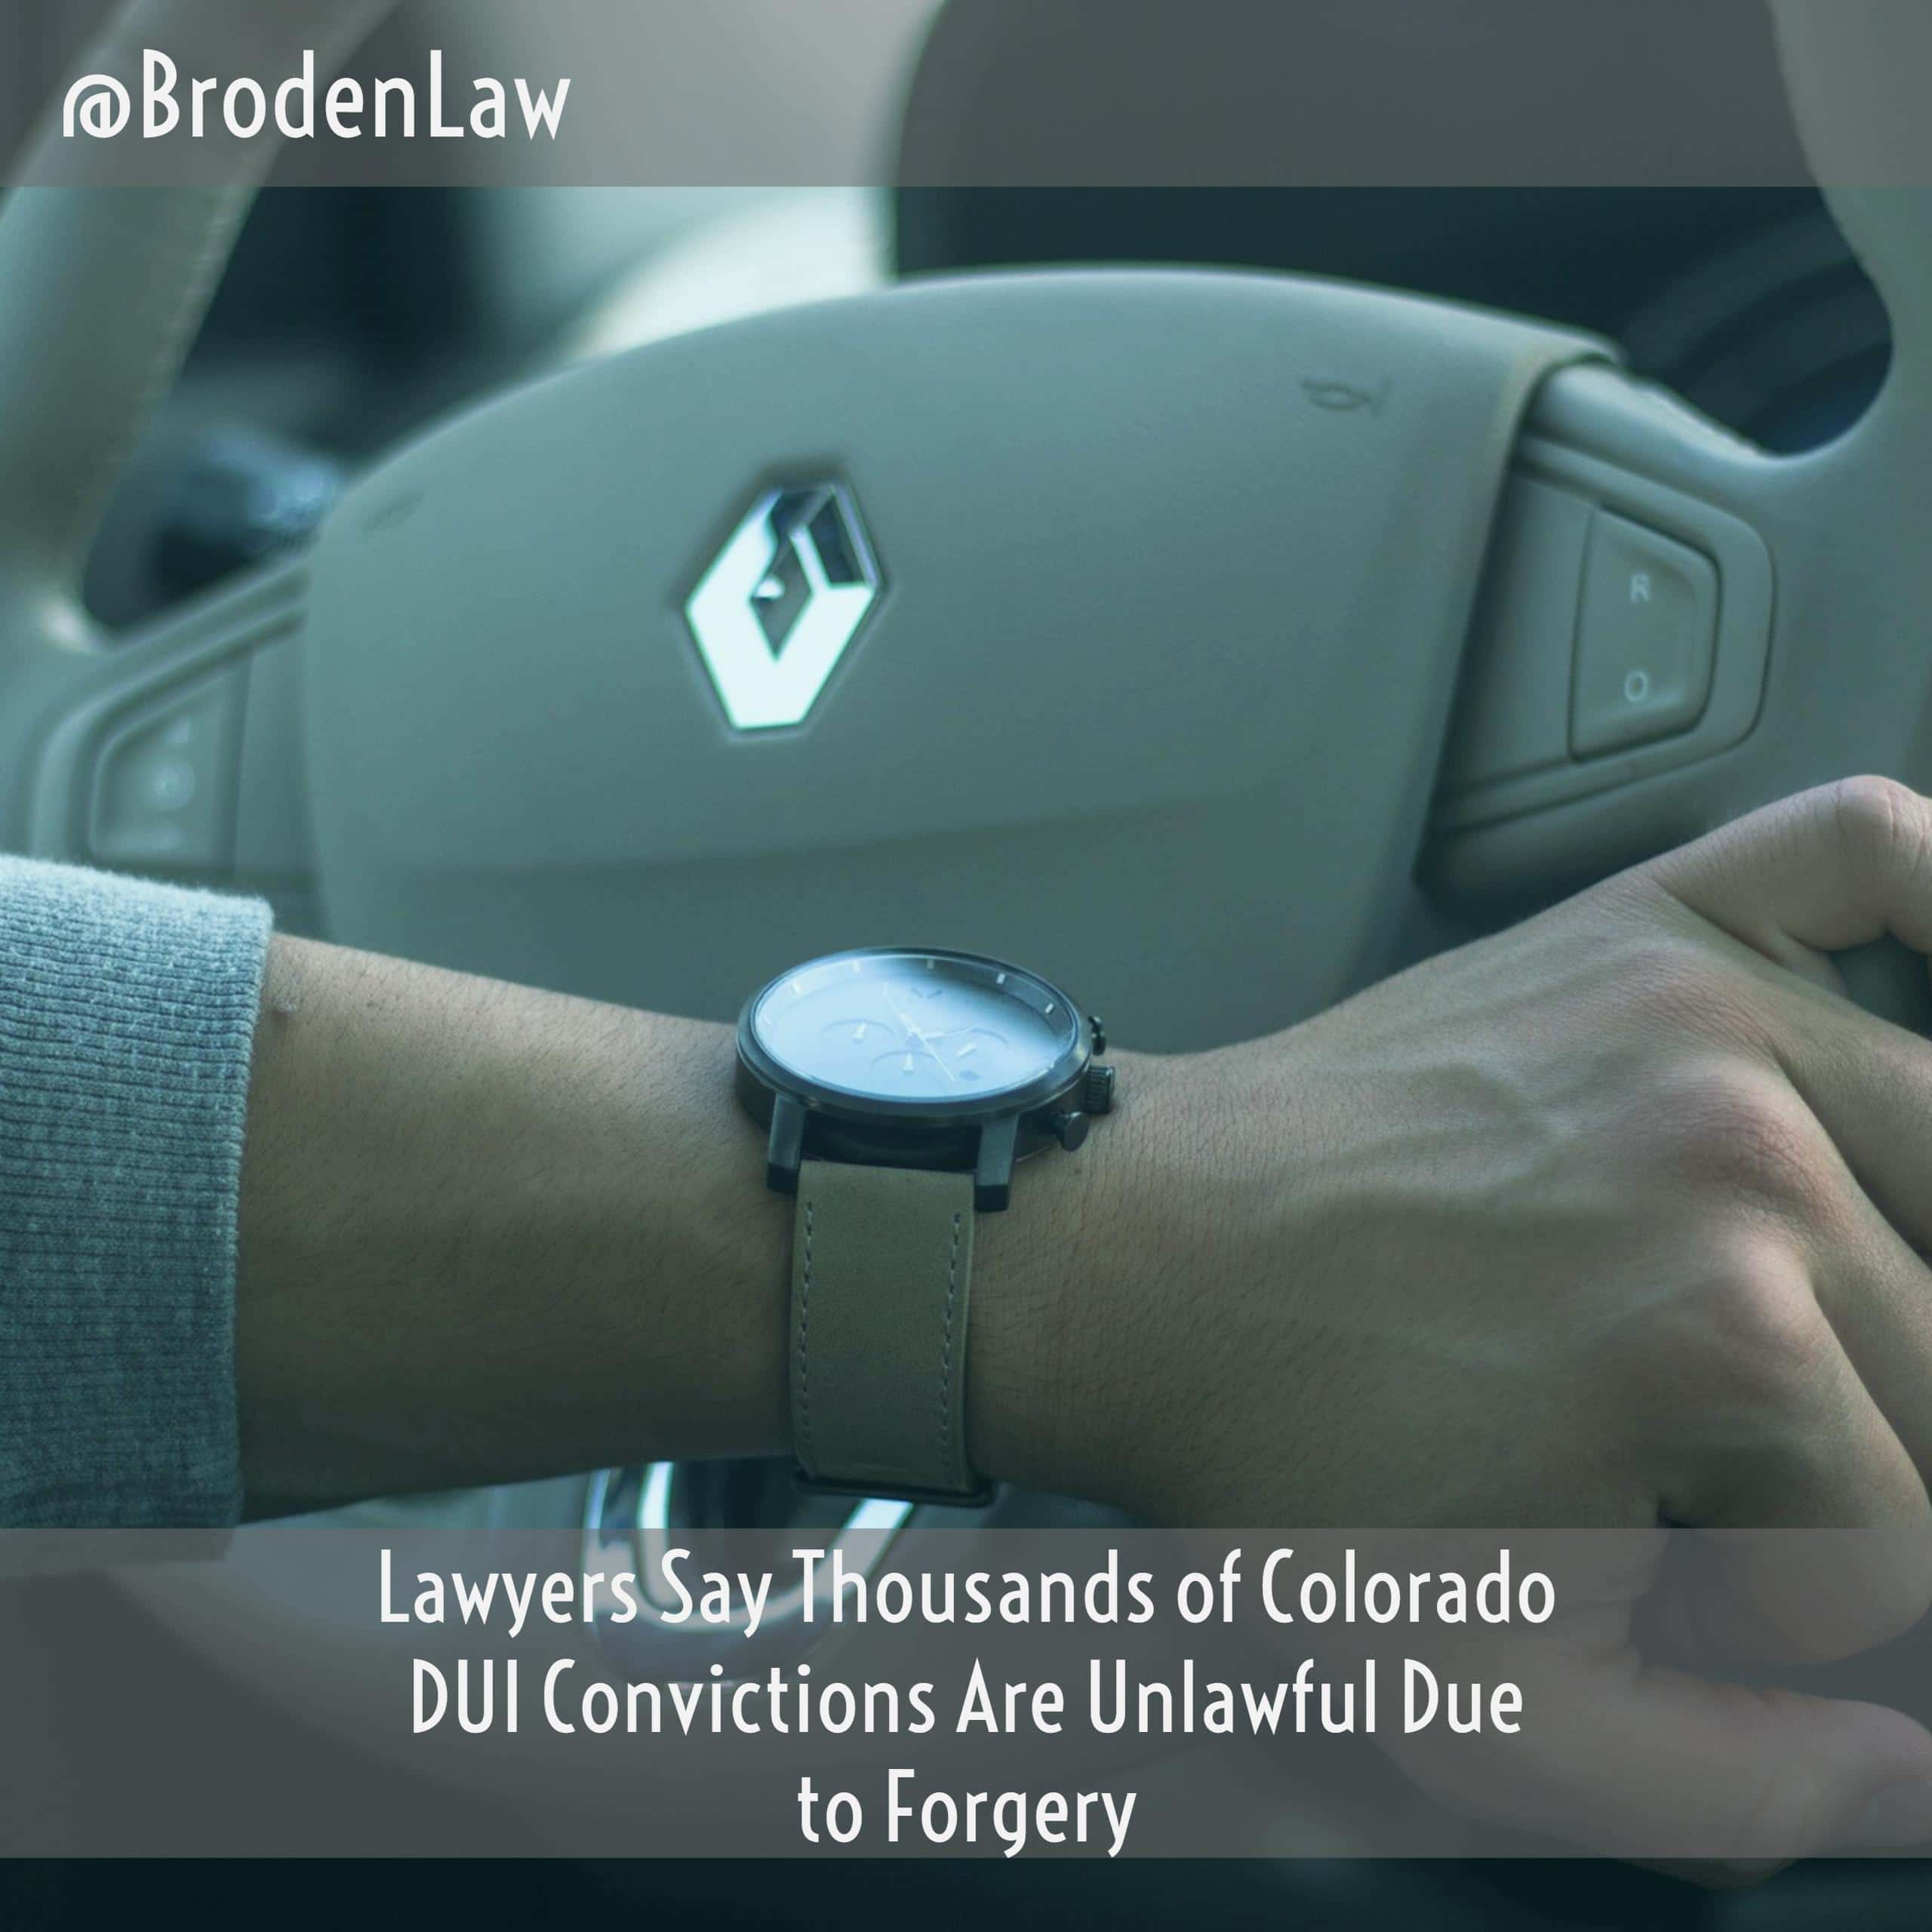 Lawyers Say Thousands of Colorado DUI Convictions Are Unlawful Due to Forgery